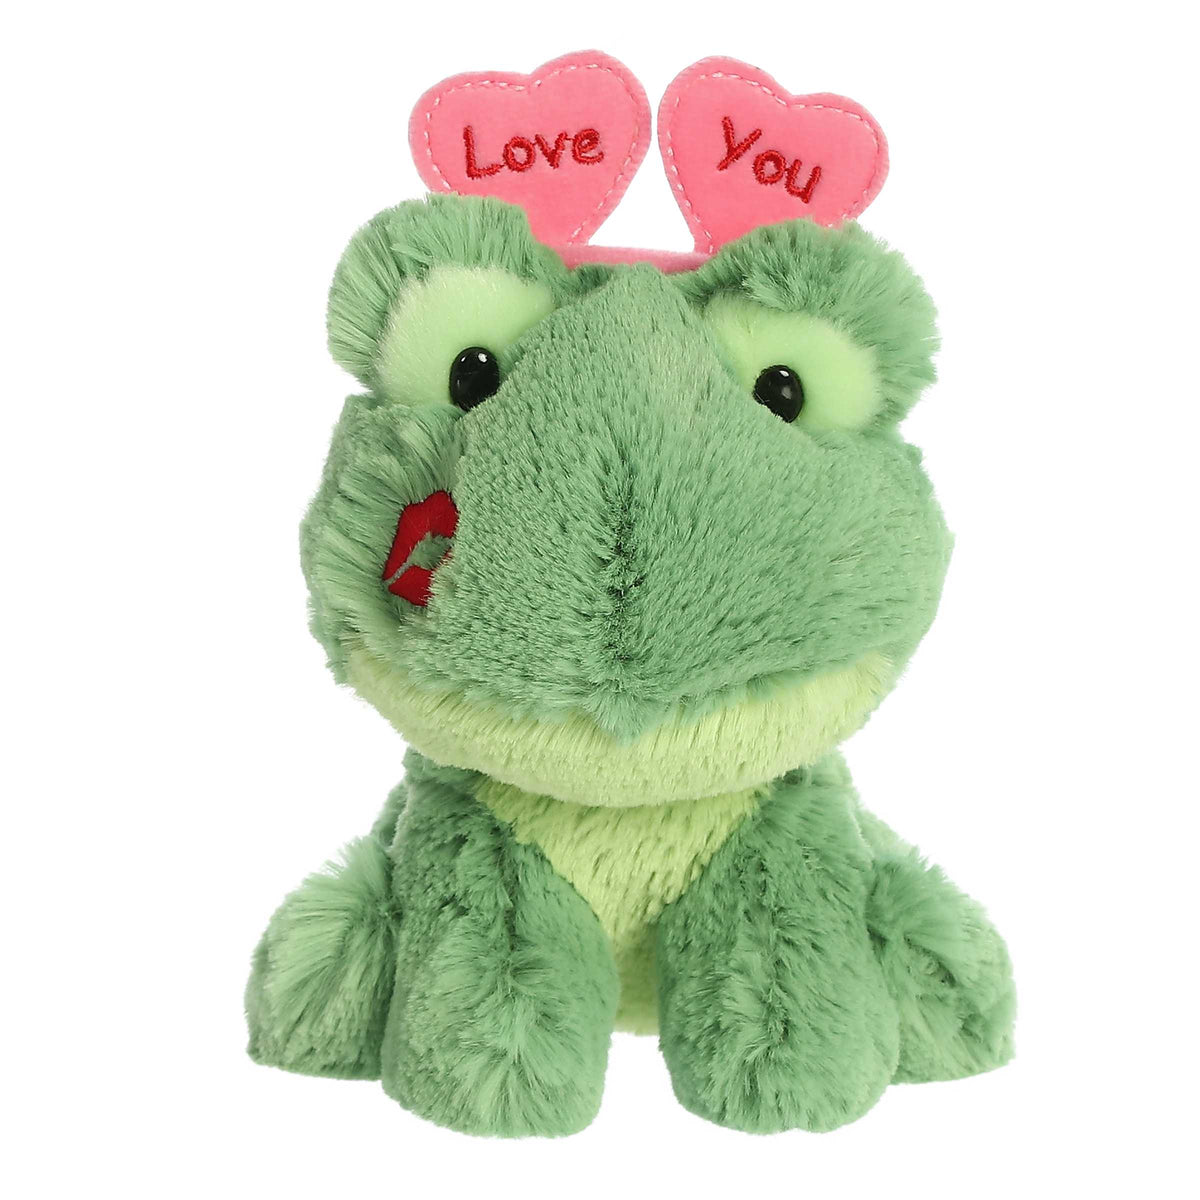 Green Love You Frog plush from Love On The Mind, with a red lipstick kiss and cute 'Love You' heart headband